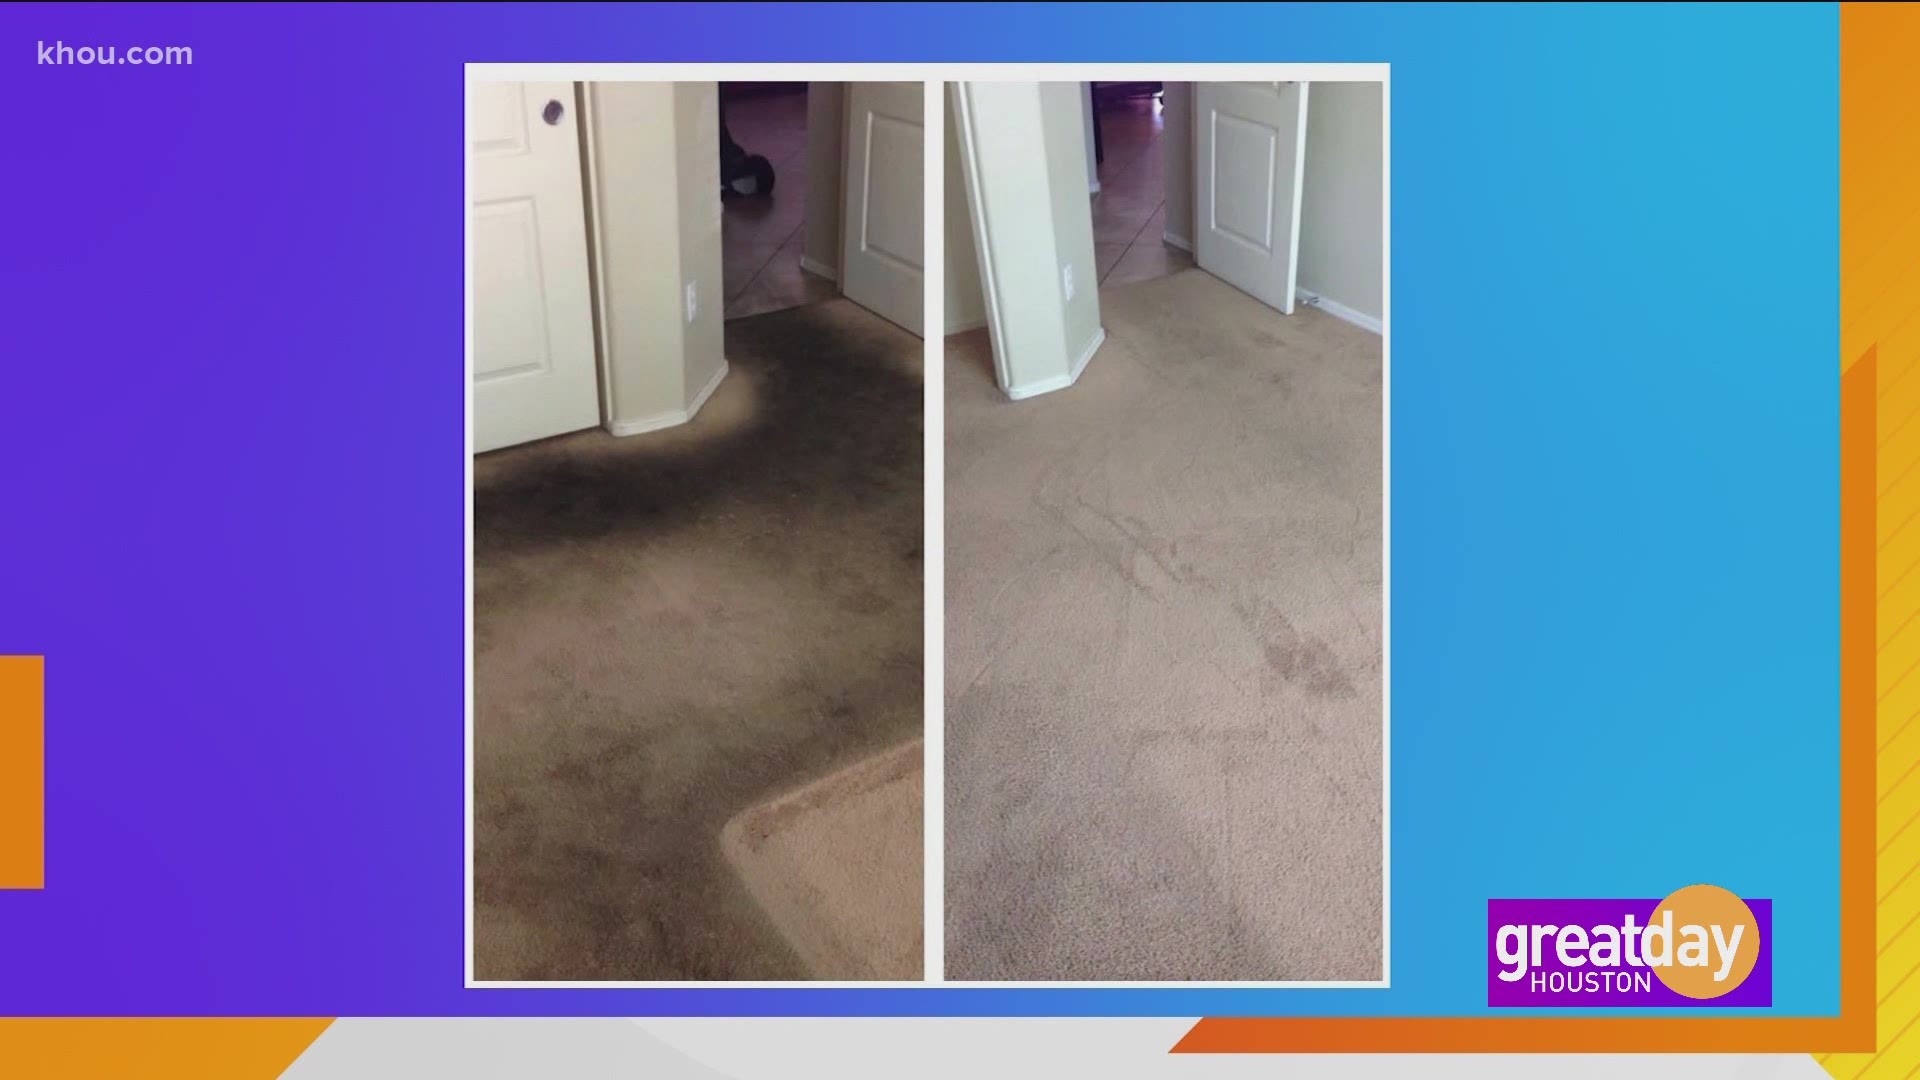 Kyle Peterson, General Manager for Zerorez, shares how they can remove all types of stains, deodorize and disinfect your carpet or upholstery.